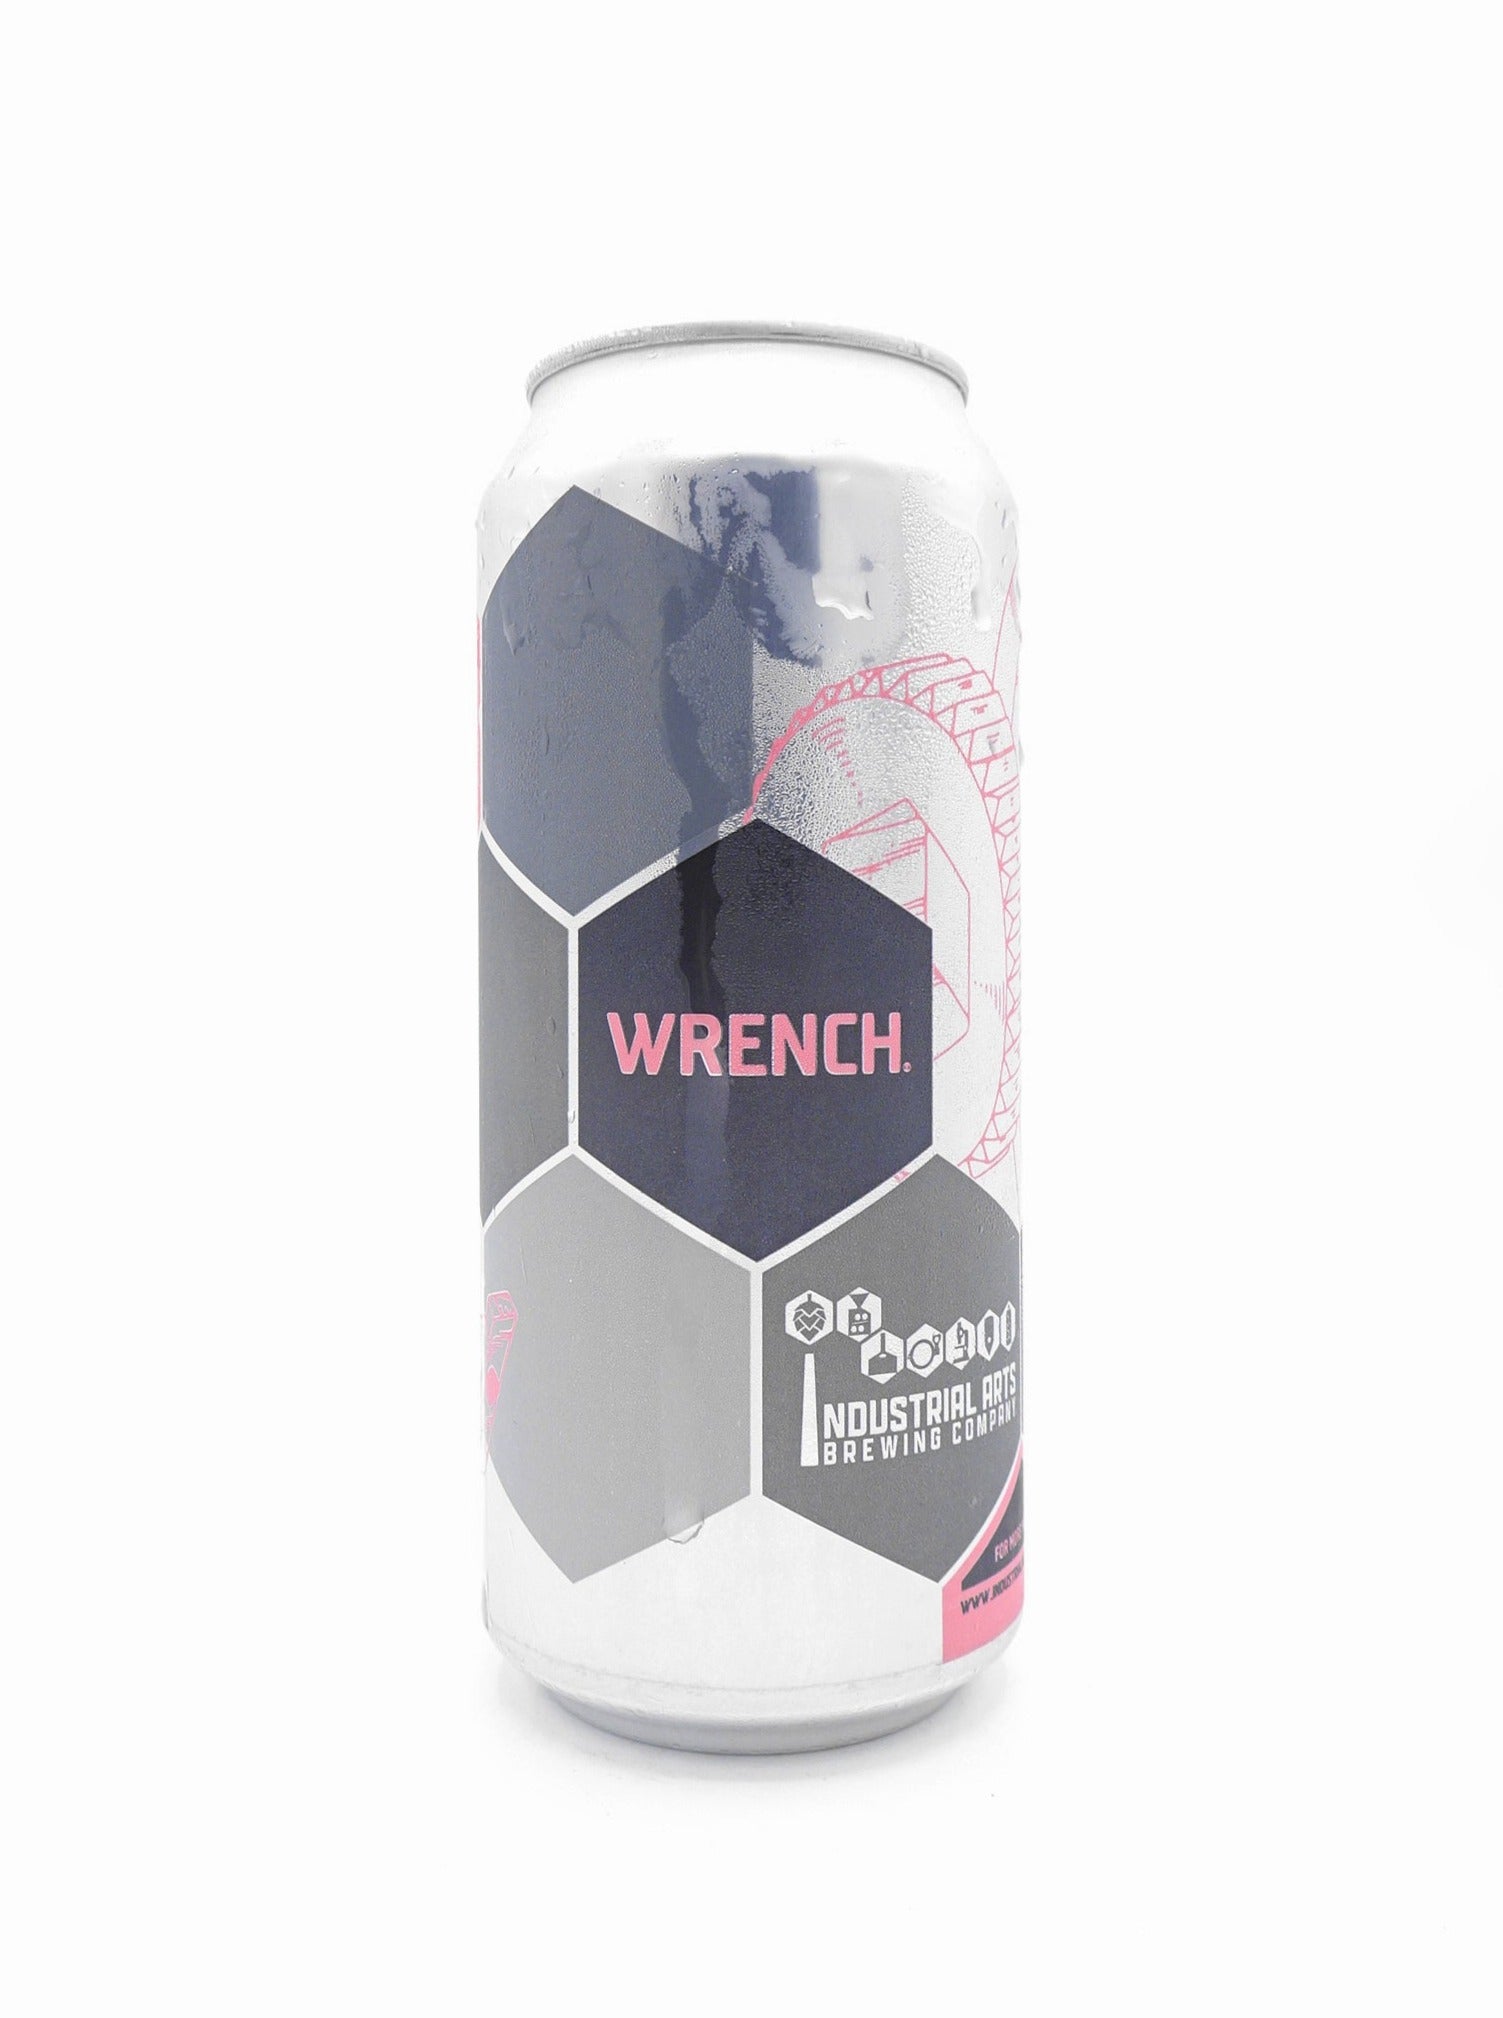 Wrench／レンチ